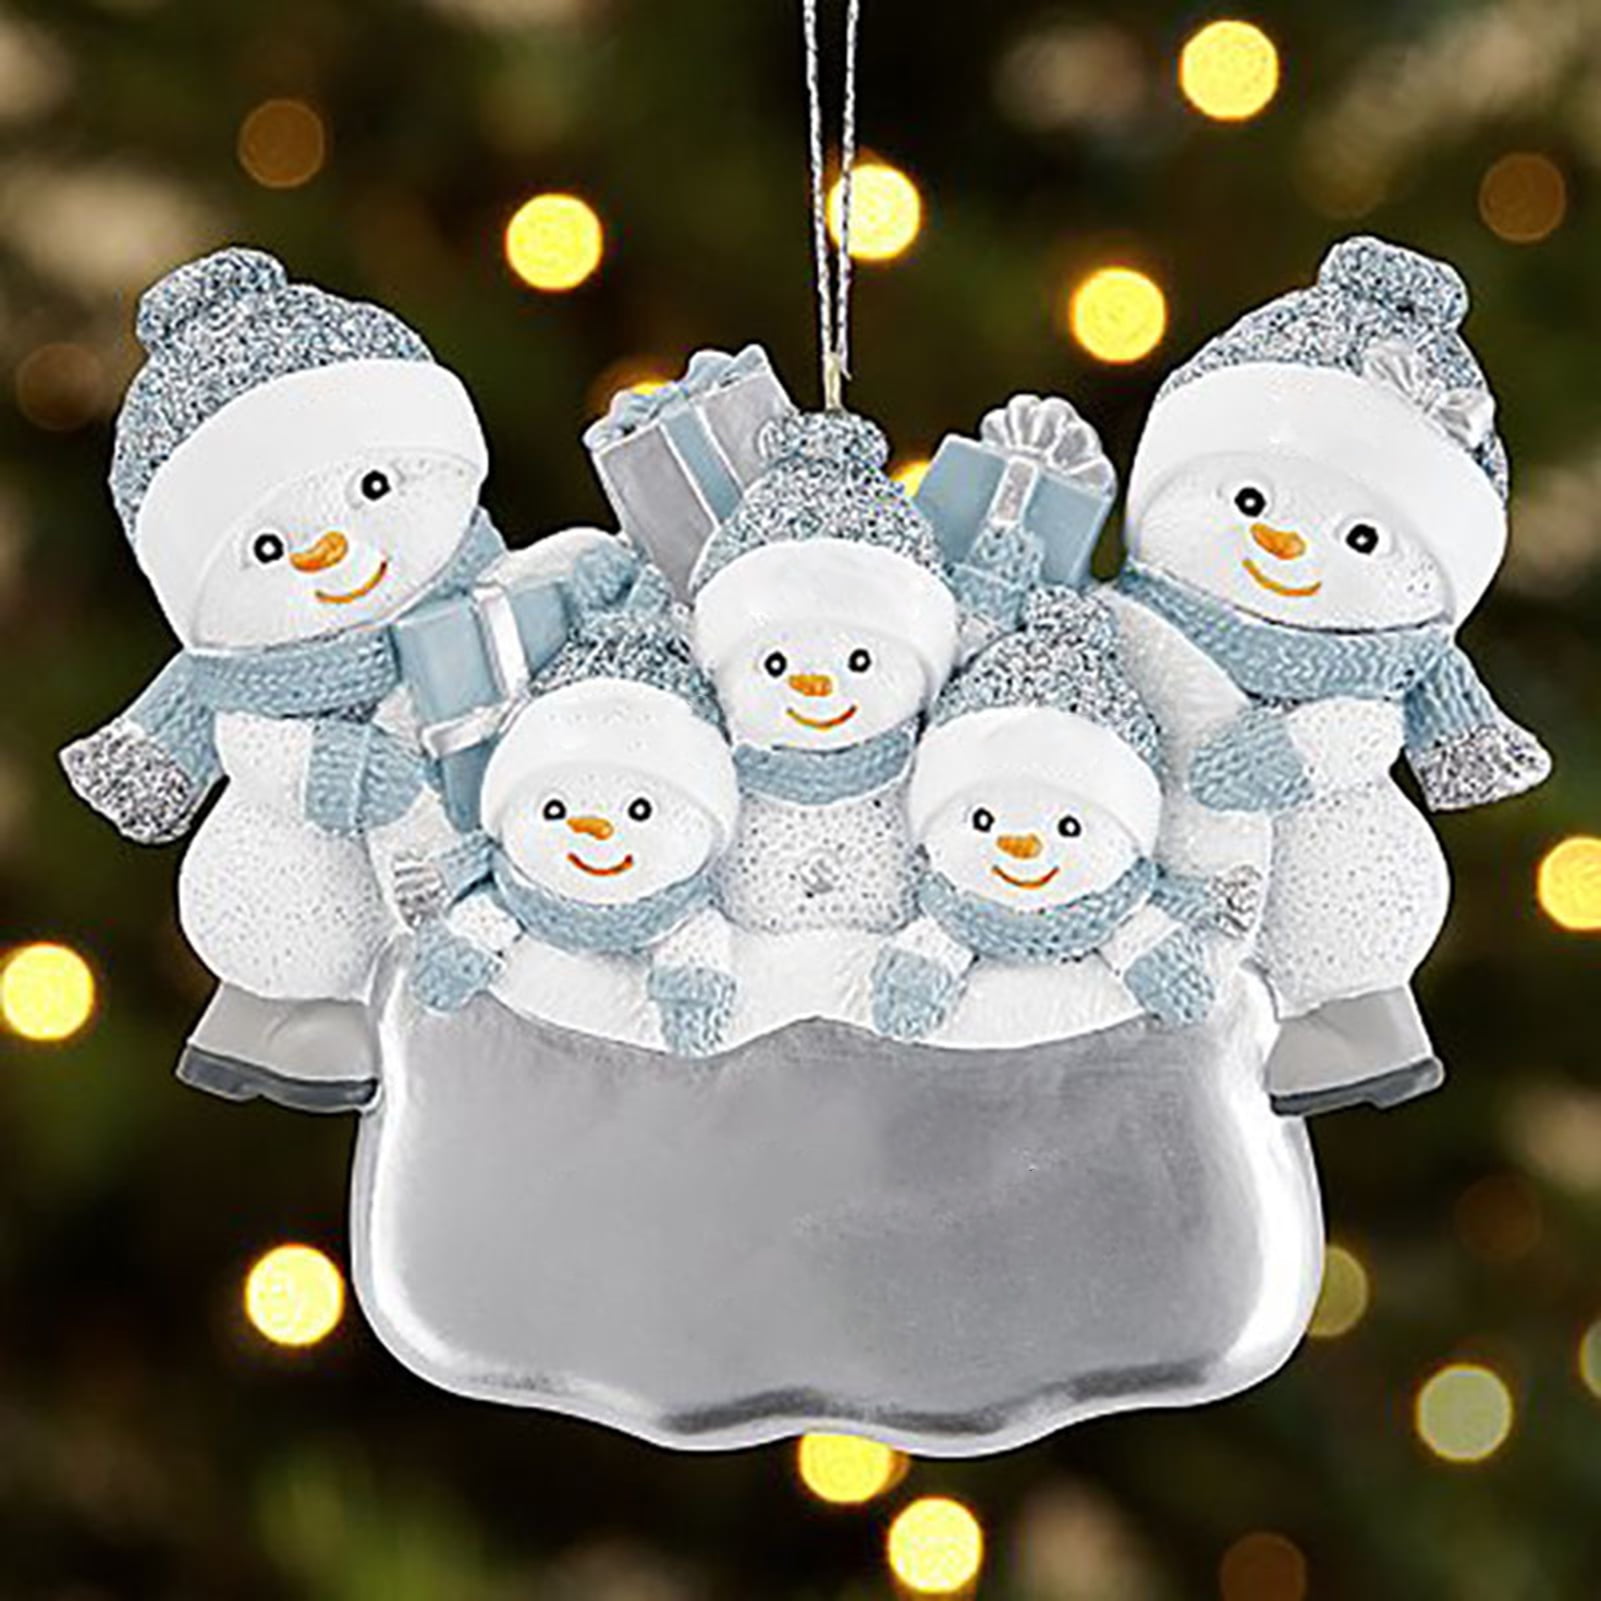 Personalized "SNOW BUDDIES" Christmas Hanging Tree Ornament HOLIDAY GIFT 2020 